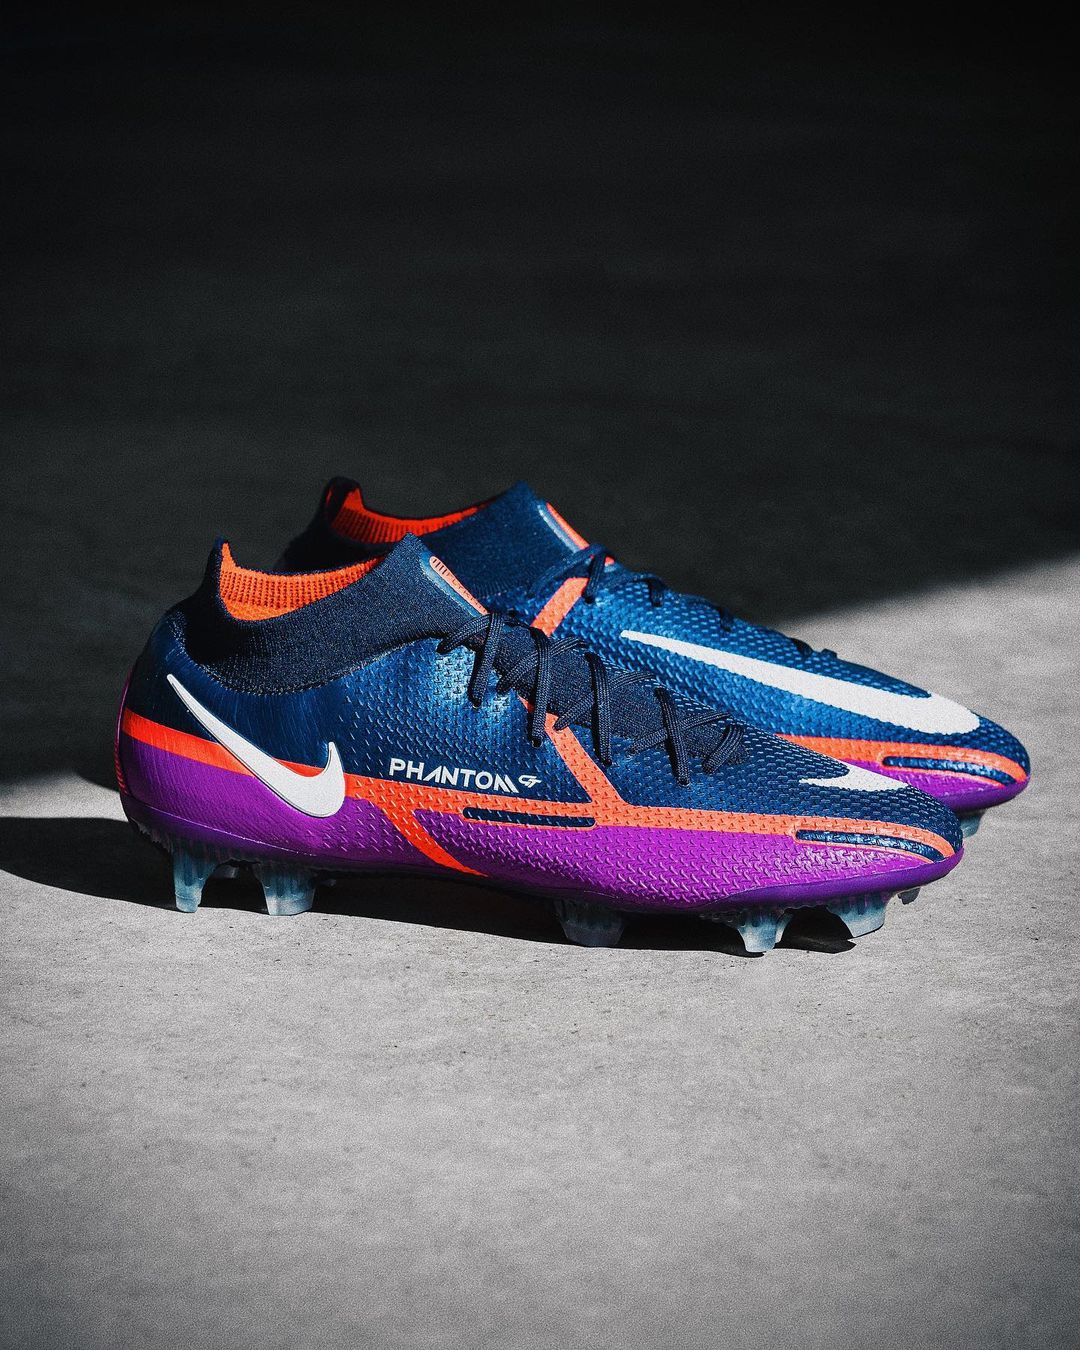 Pro:Direct Soccer US on Twitter: "Show your next-gen skills with the new Nike Phantom II UV 🔥 Available now at Pro:Direct US 📲 Shop here https://t.co/r6Of5hbnfQ https://t.co/wnqzIbM3Jw" Twitter